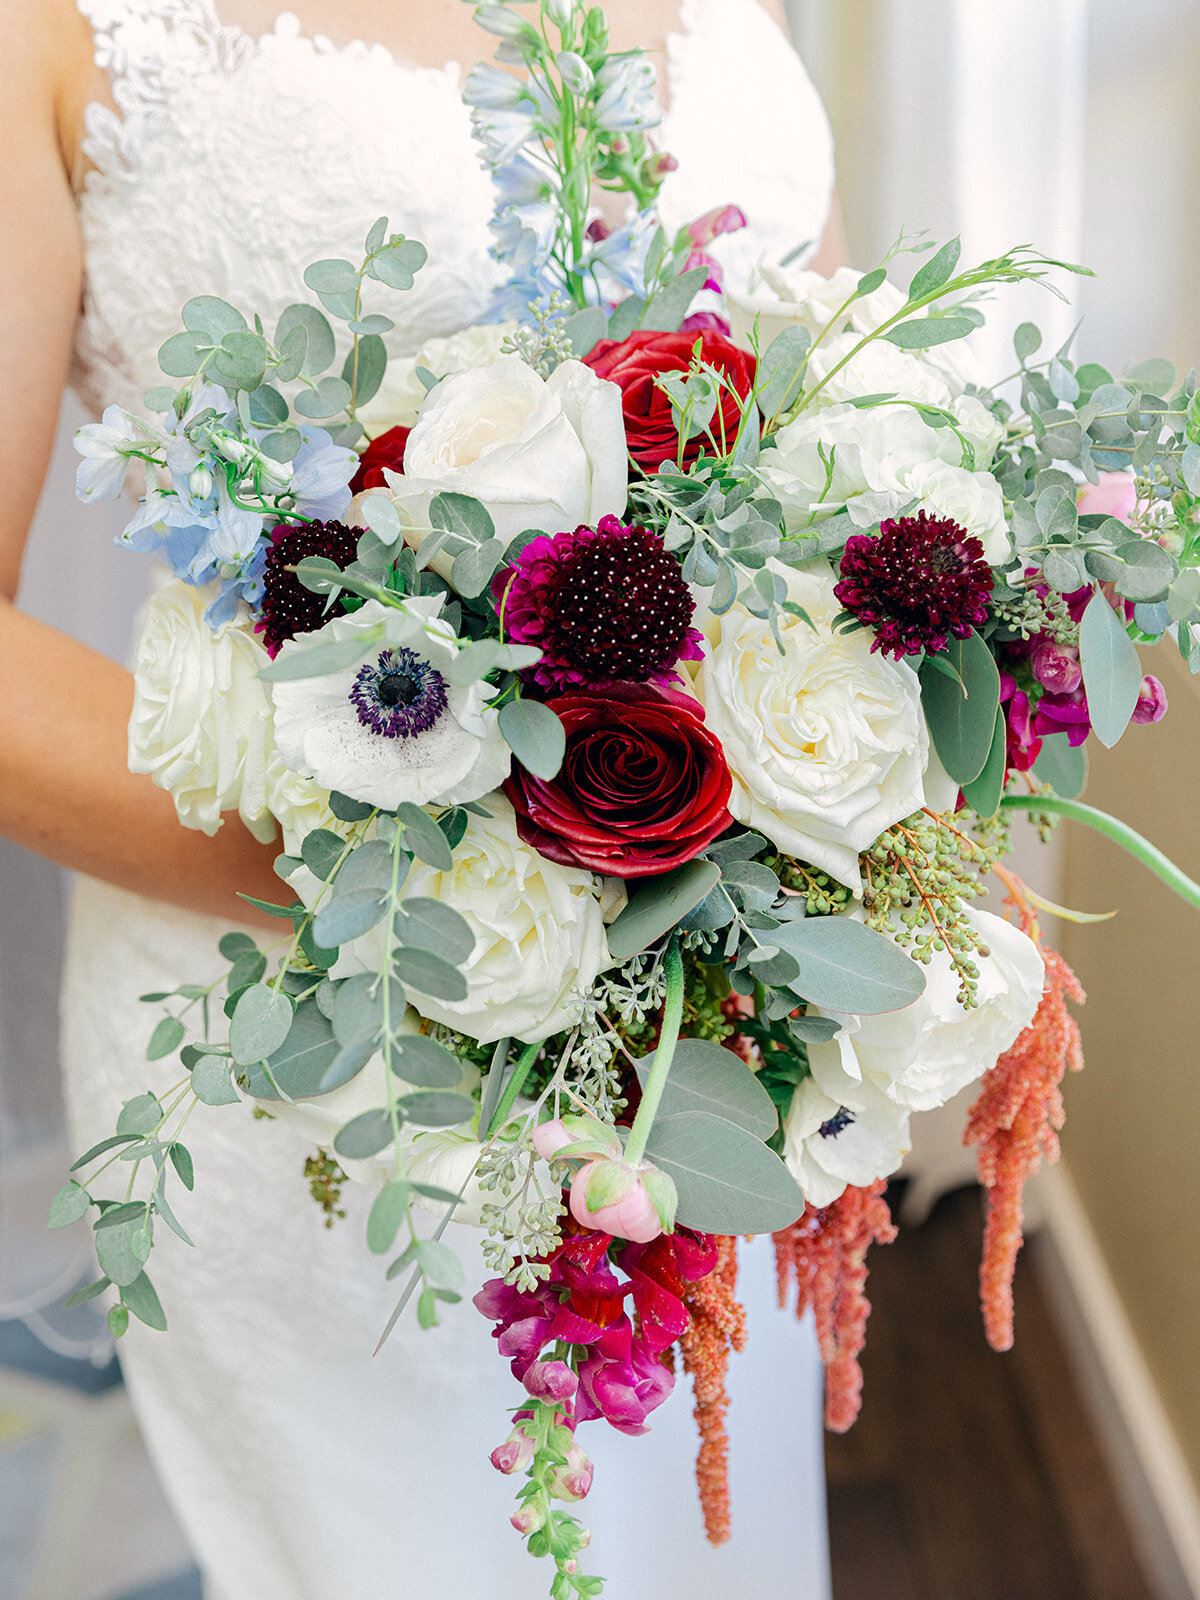 brides wedding bouquet with white and red roses eucalyptus and pink sprays